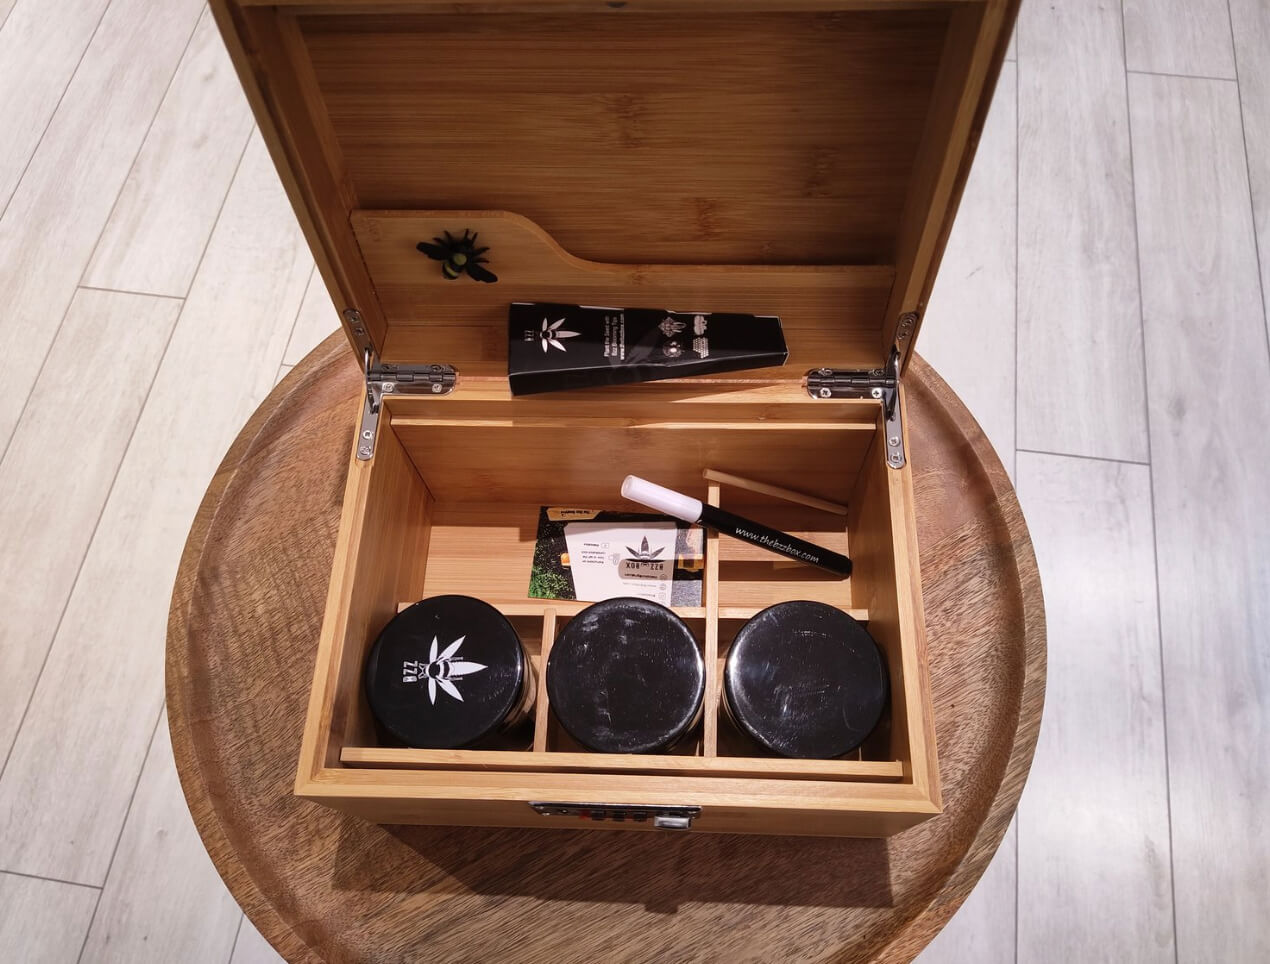 Bzz Stash Storage box featured in W. Accessories review.